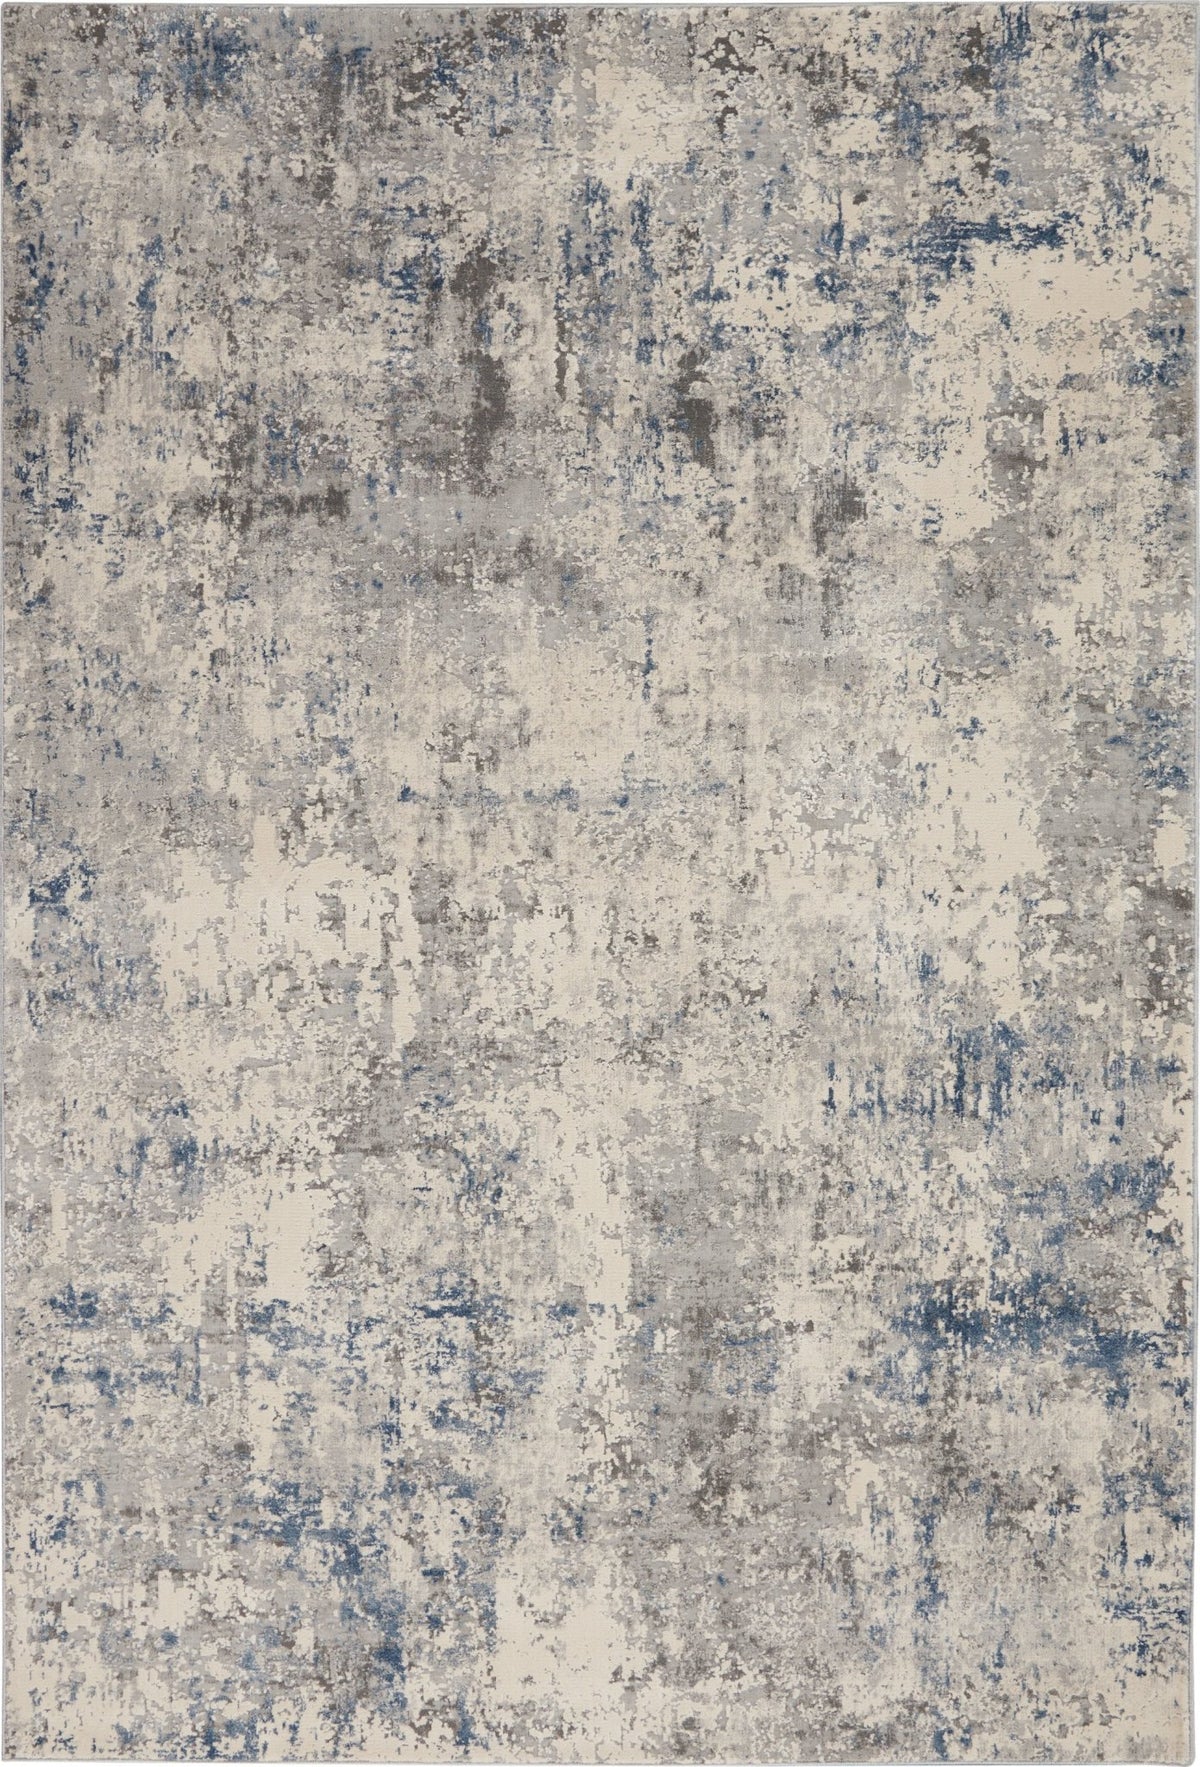 Rustic Textures RUS07 Ivory/Grey-blue Rug - Rug & Home